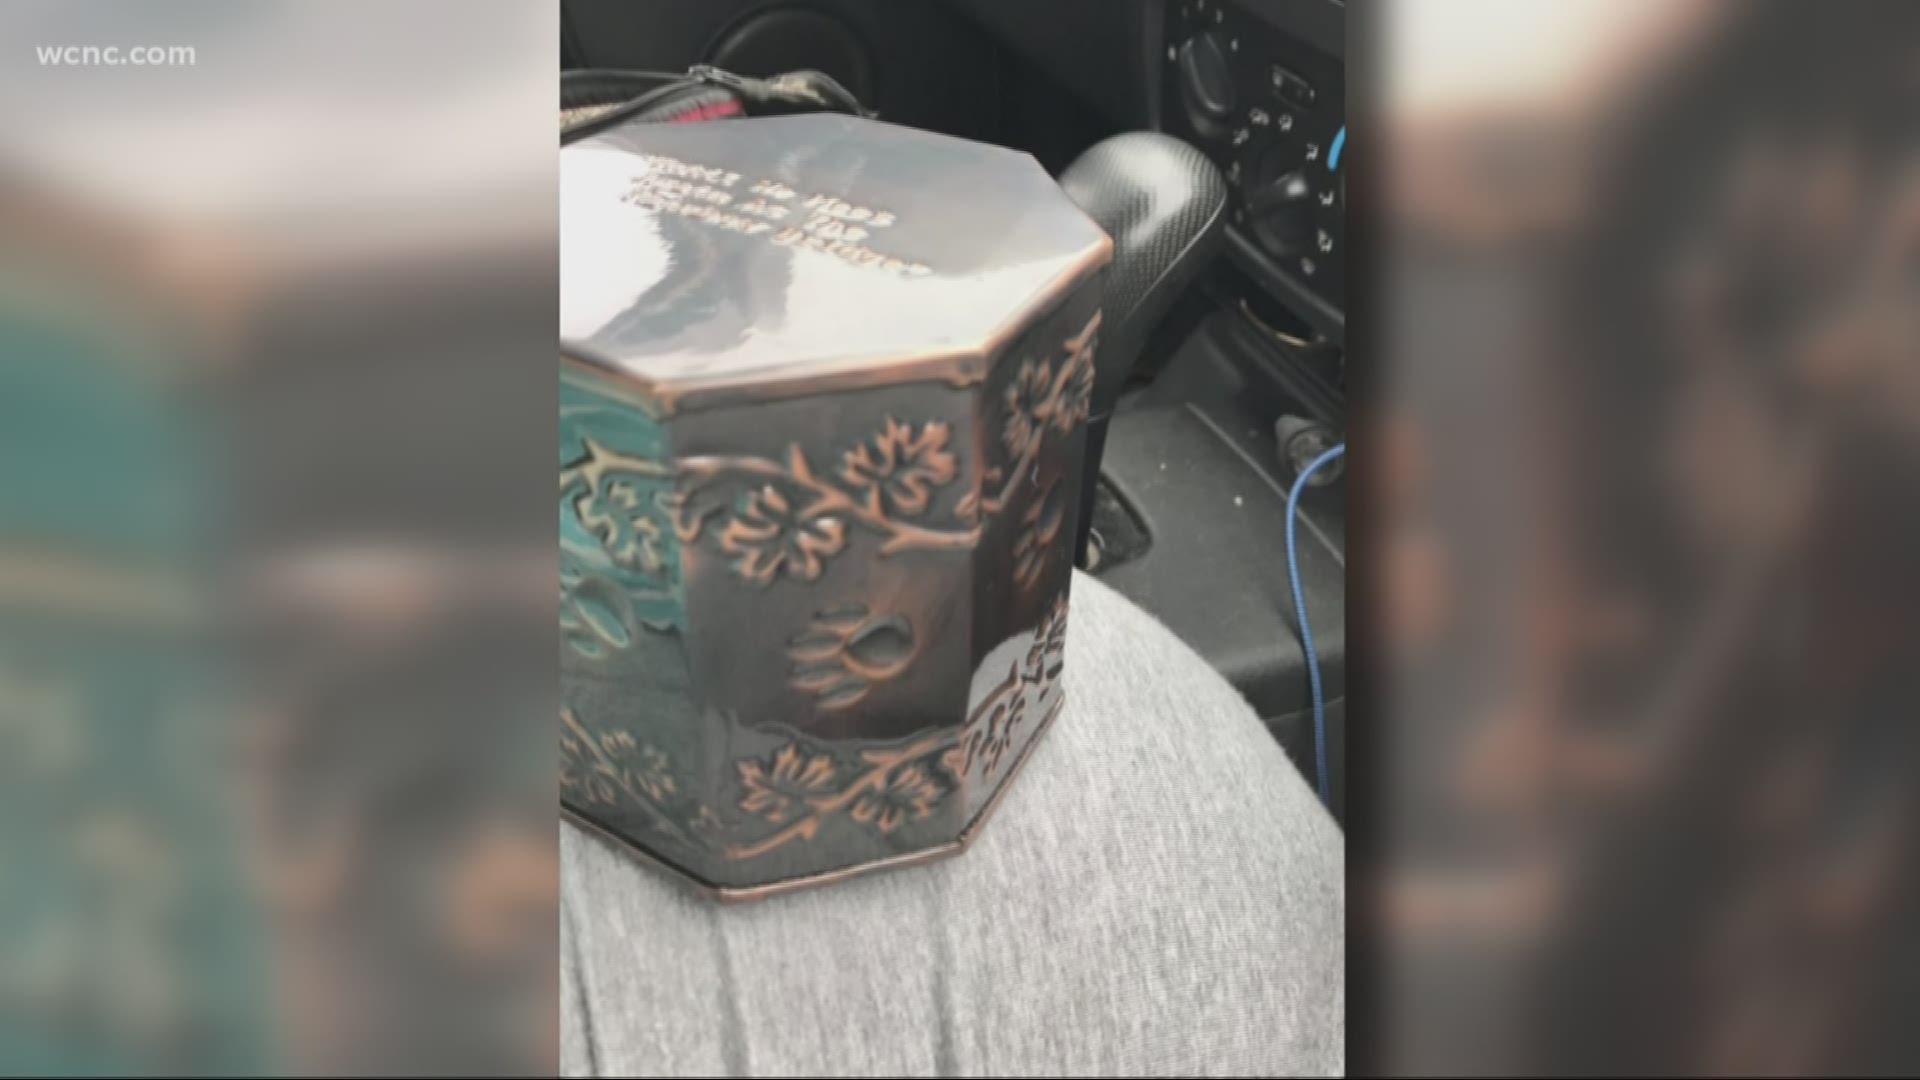 The woman who bought the urn thinks it may have been brought to the thrift store by mistake.